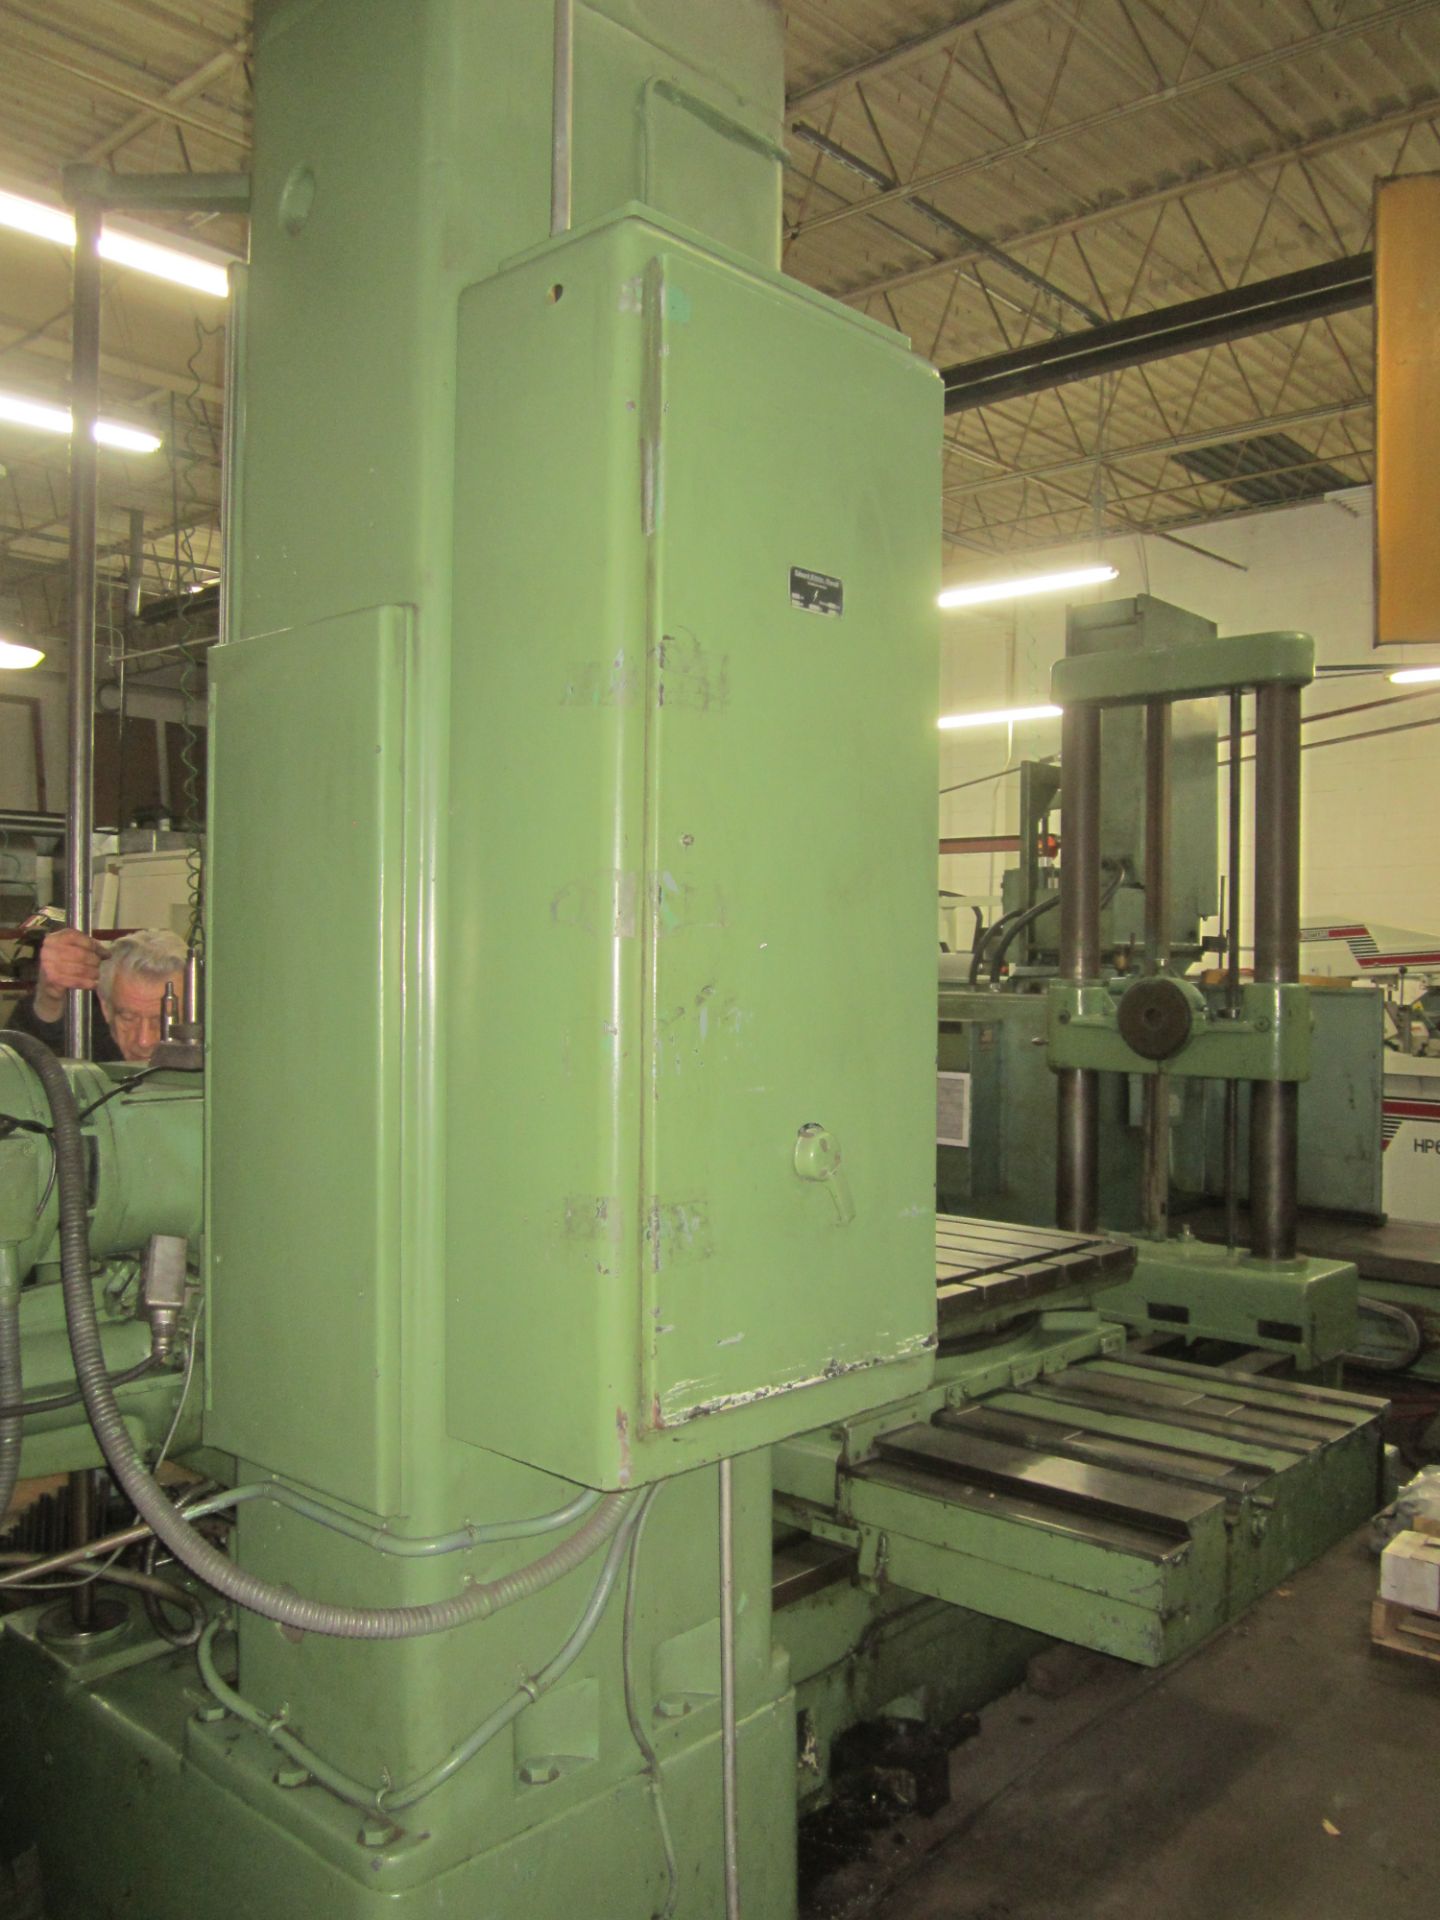 Scharmann 3" Horizontal Boring Mill, s/n 7146, 44" X 48" Power Rotary Table, Outboard Support, 51" - Image 9 of 9